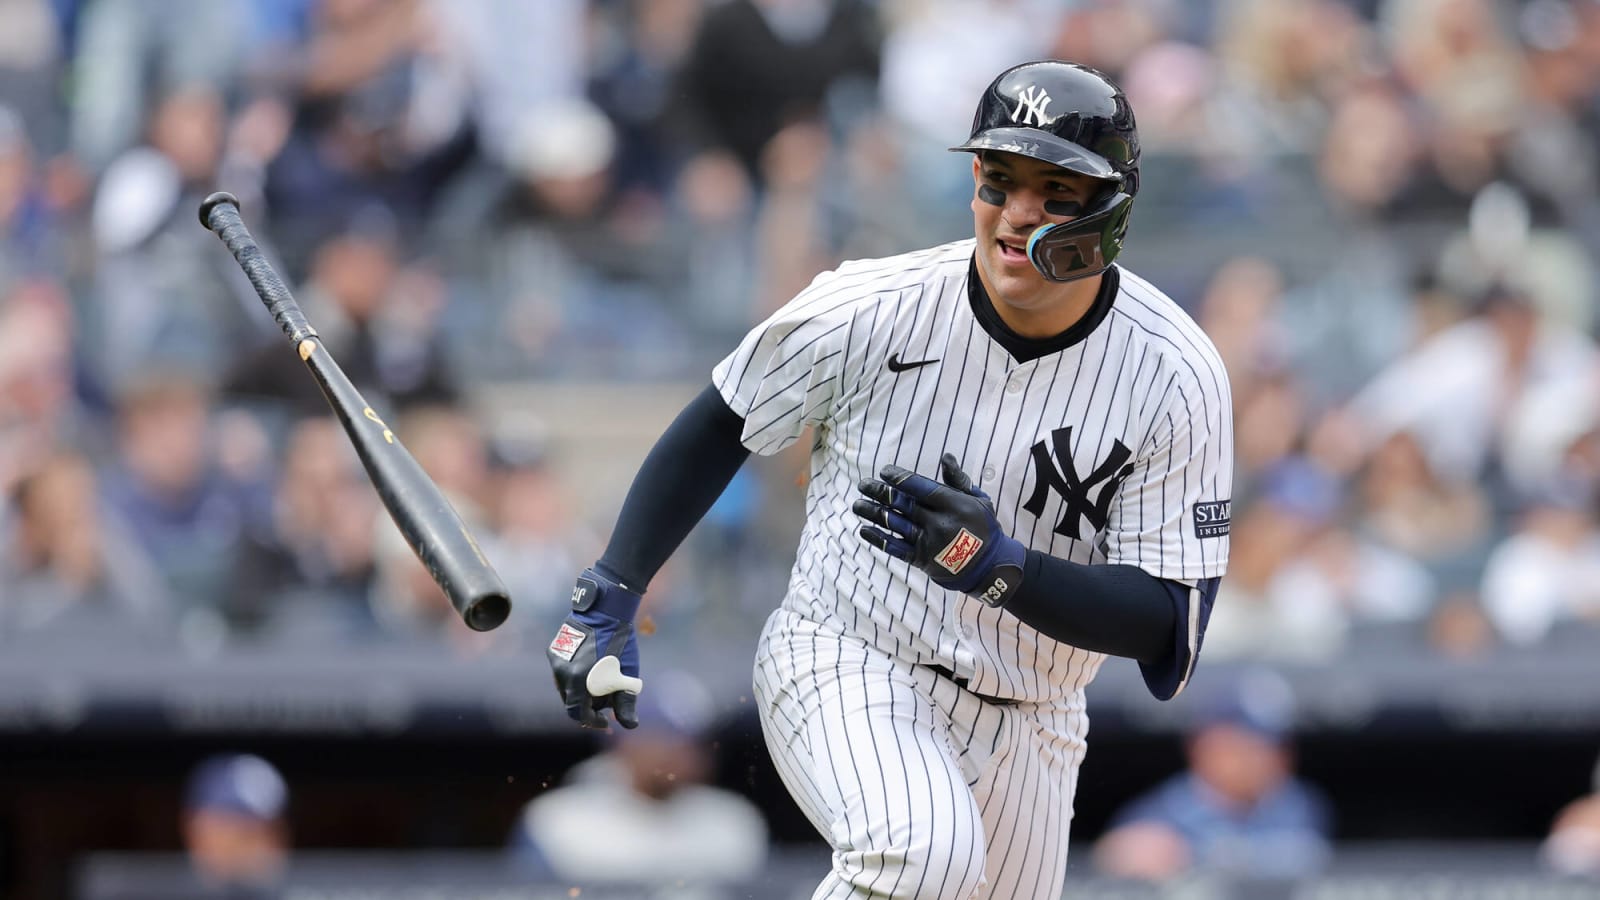 Yankees are getting surprising offensive production from veteran catcher